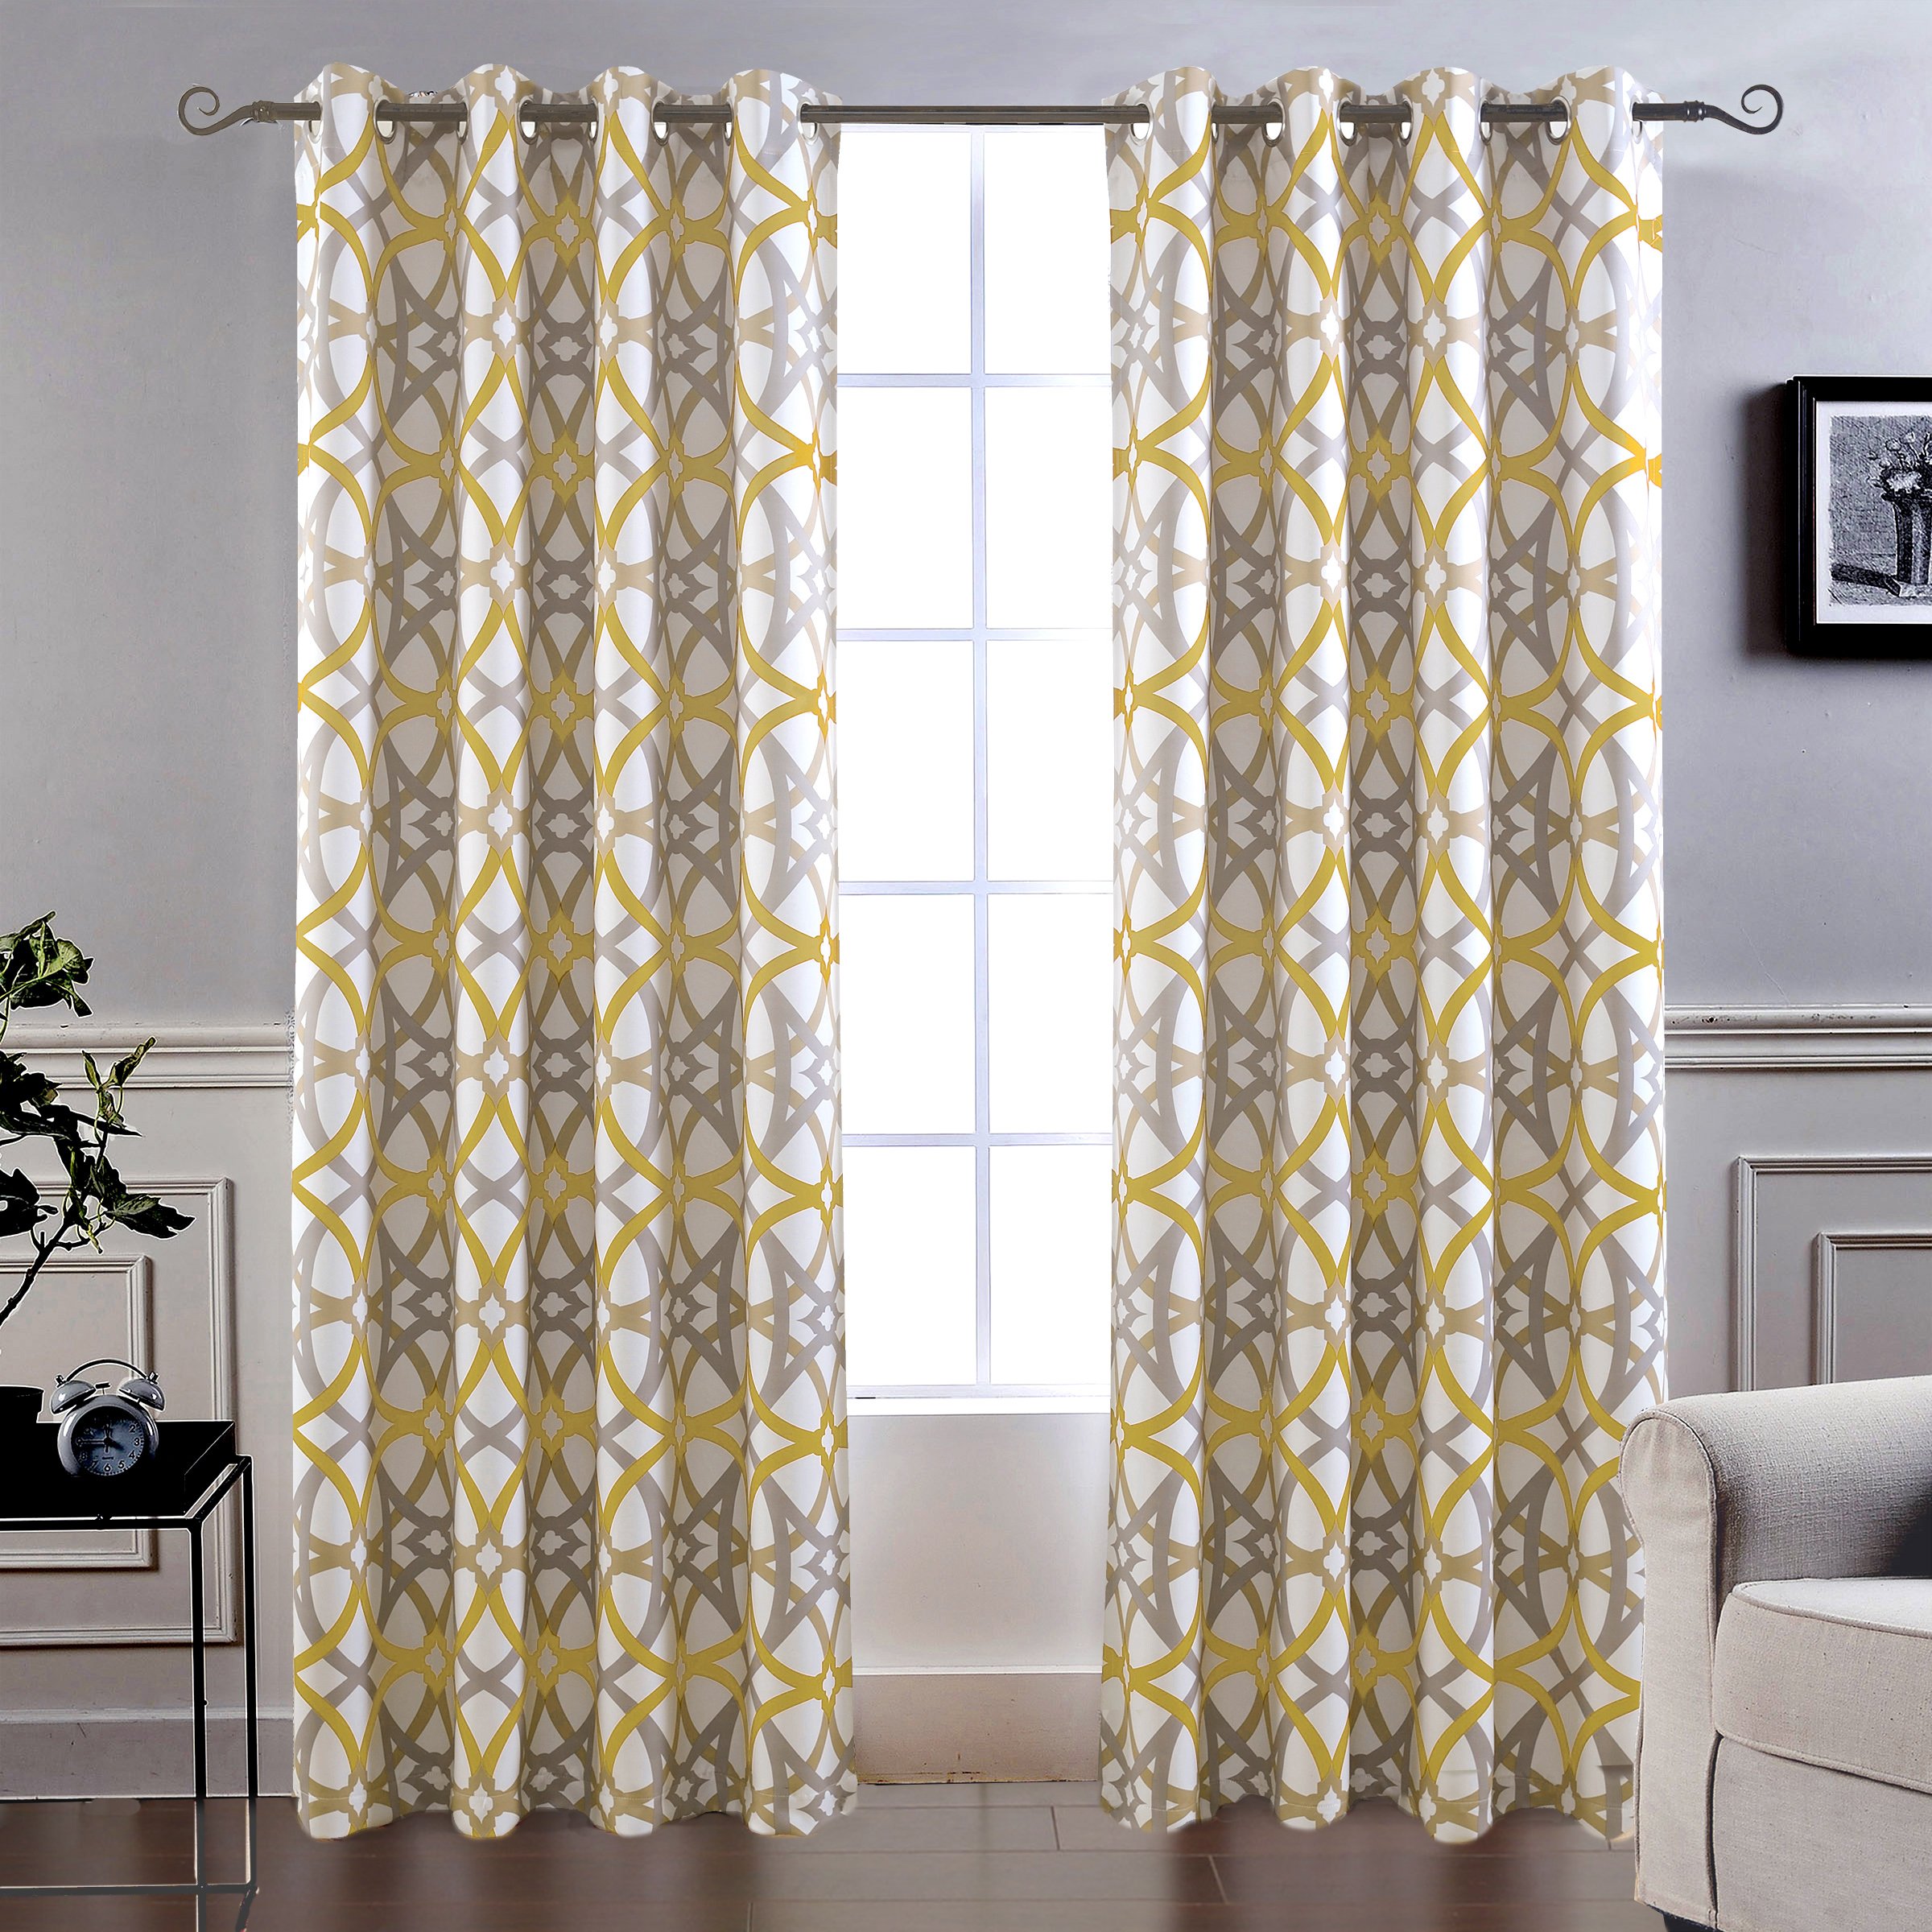 Book Cover DriftAway Alexander Thermal Blackout Grommet Unlined Window Curtains Spiral Geo Trellis Pattern Set of 2 Panels Each Size 52 Inch by 84 Inch Golden Yellow and Gray Golden Yellow/Gray 52